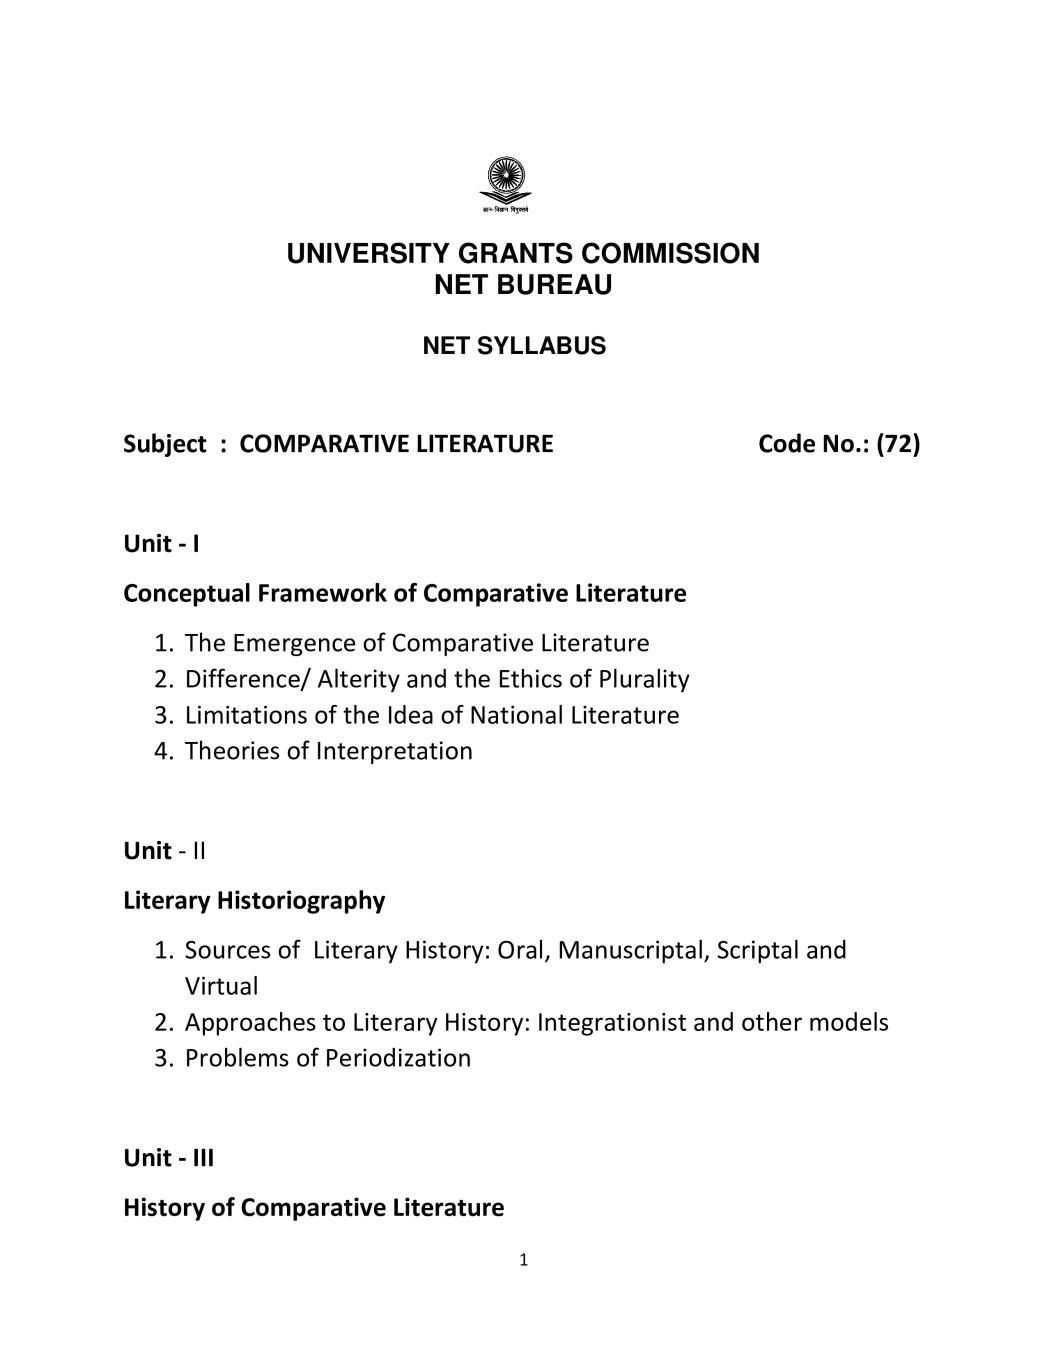 UGC NET Syllabus for Comparative Literature 2020 - Page 1